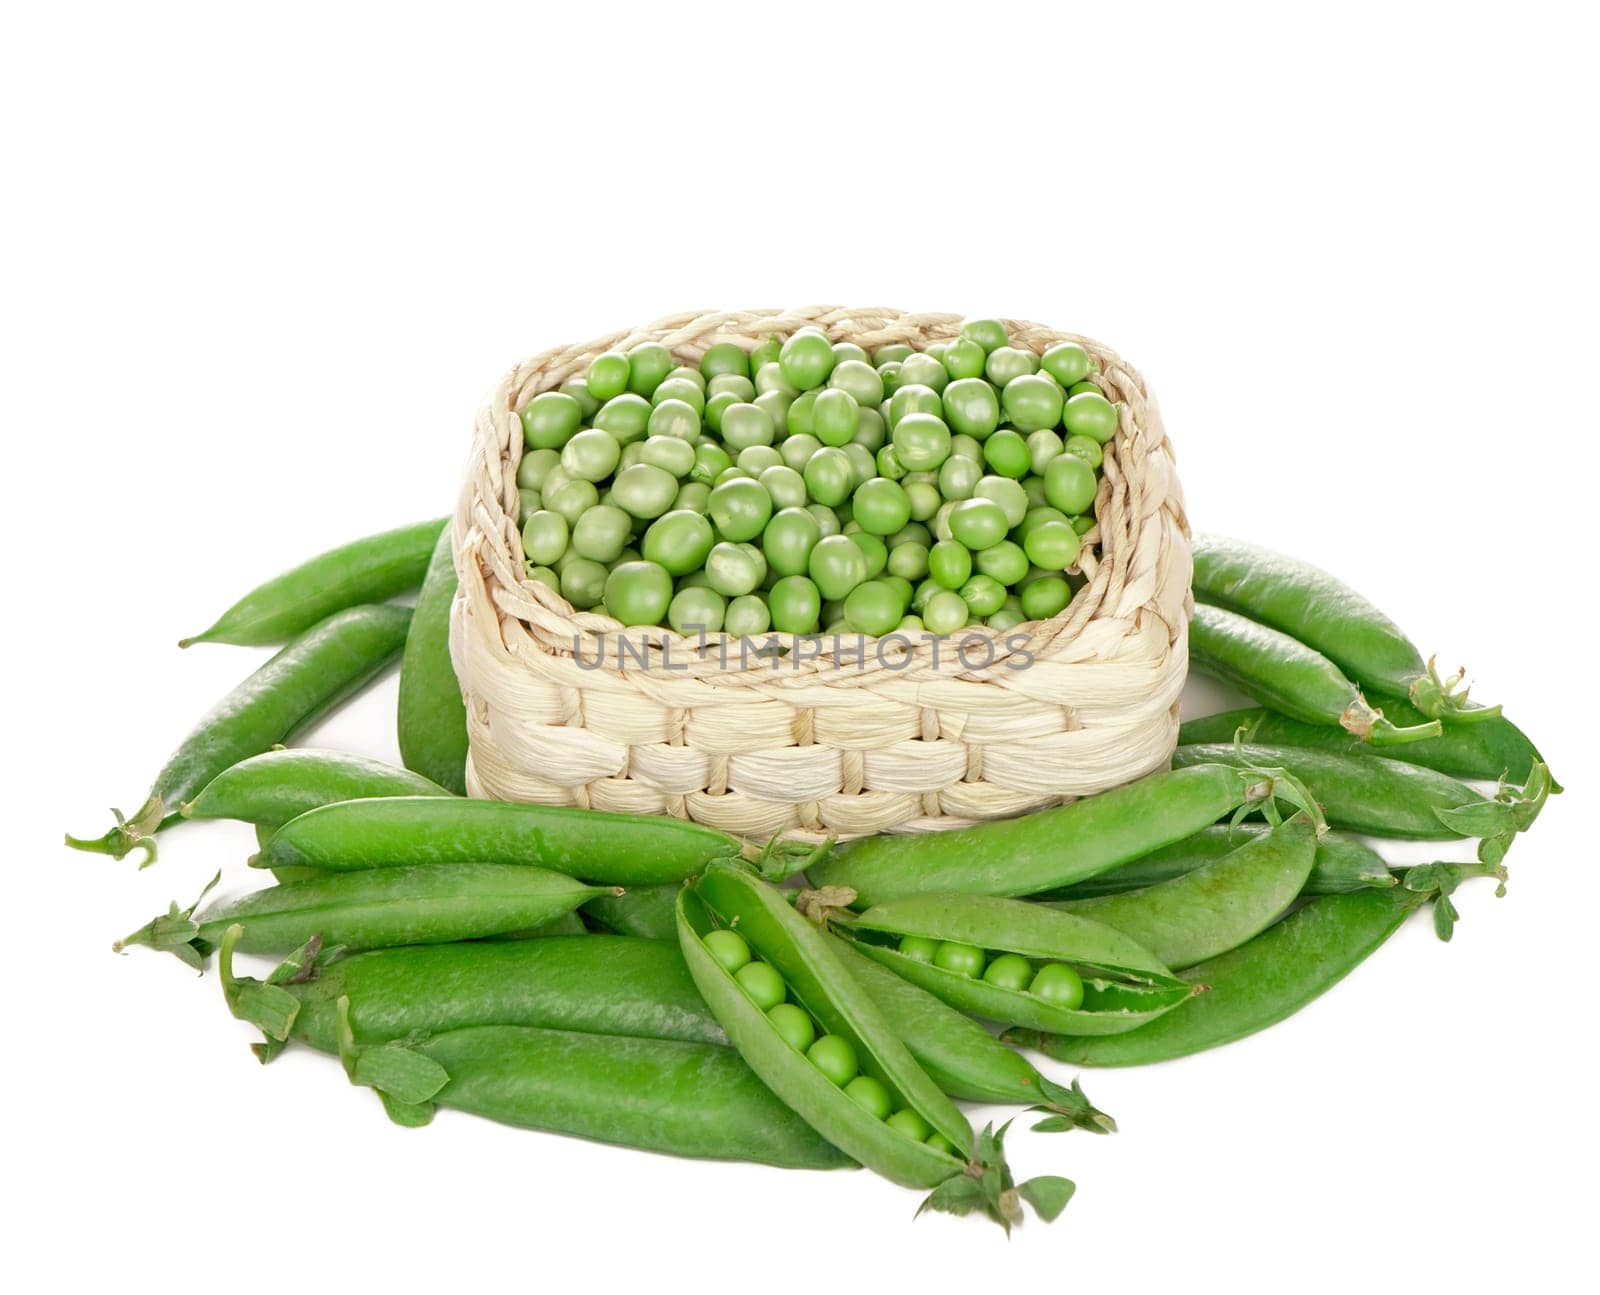 Raw green peas in pods isolated on the white background by aprilphoto